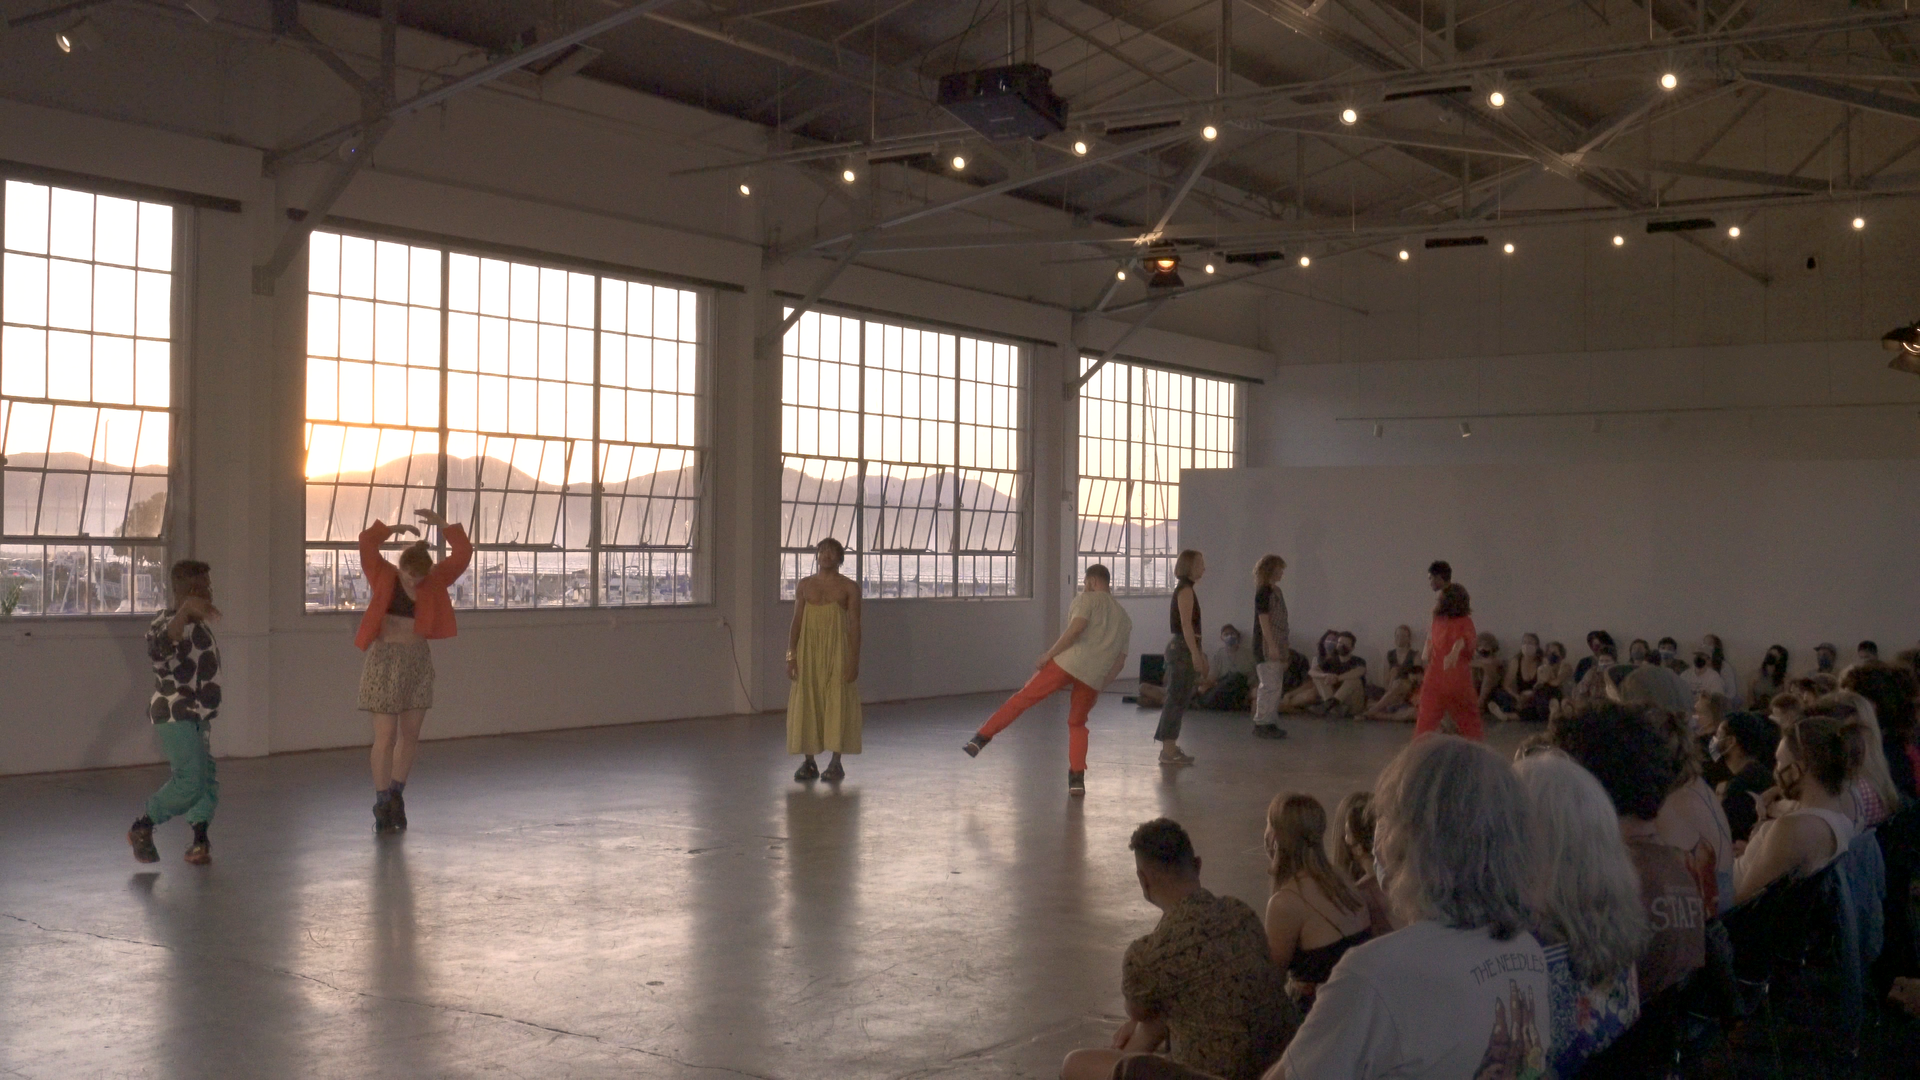 Dancers in gallery space with large open windows